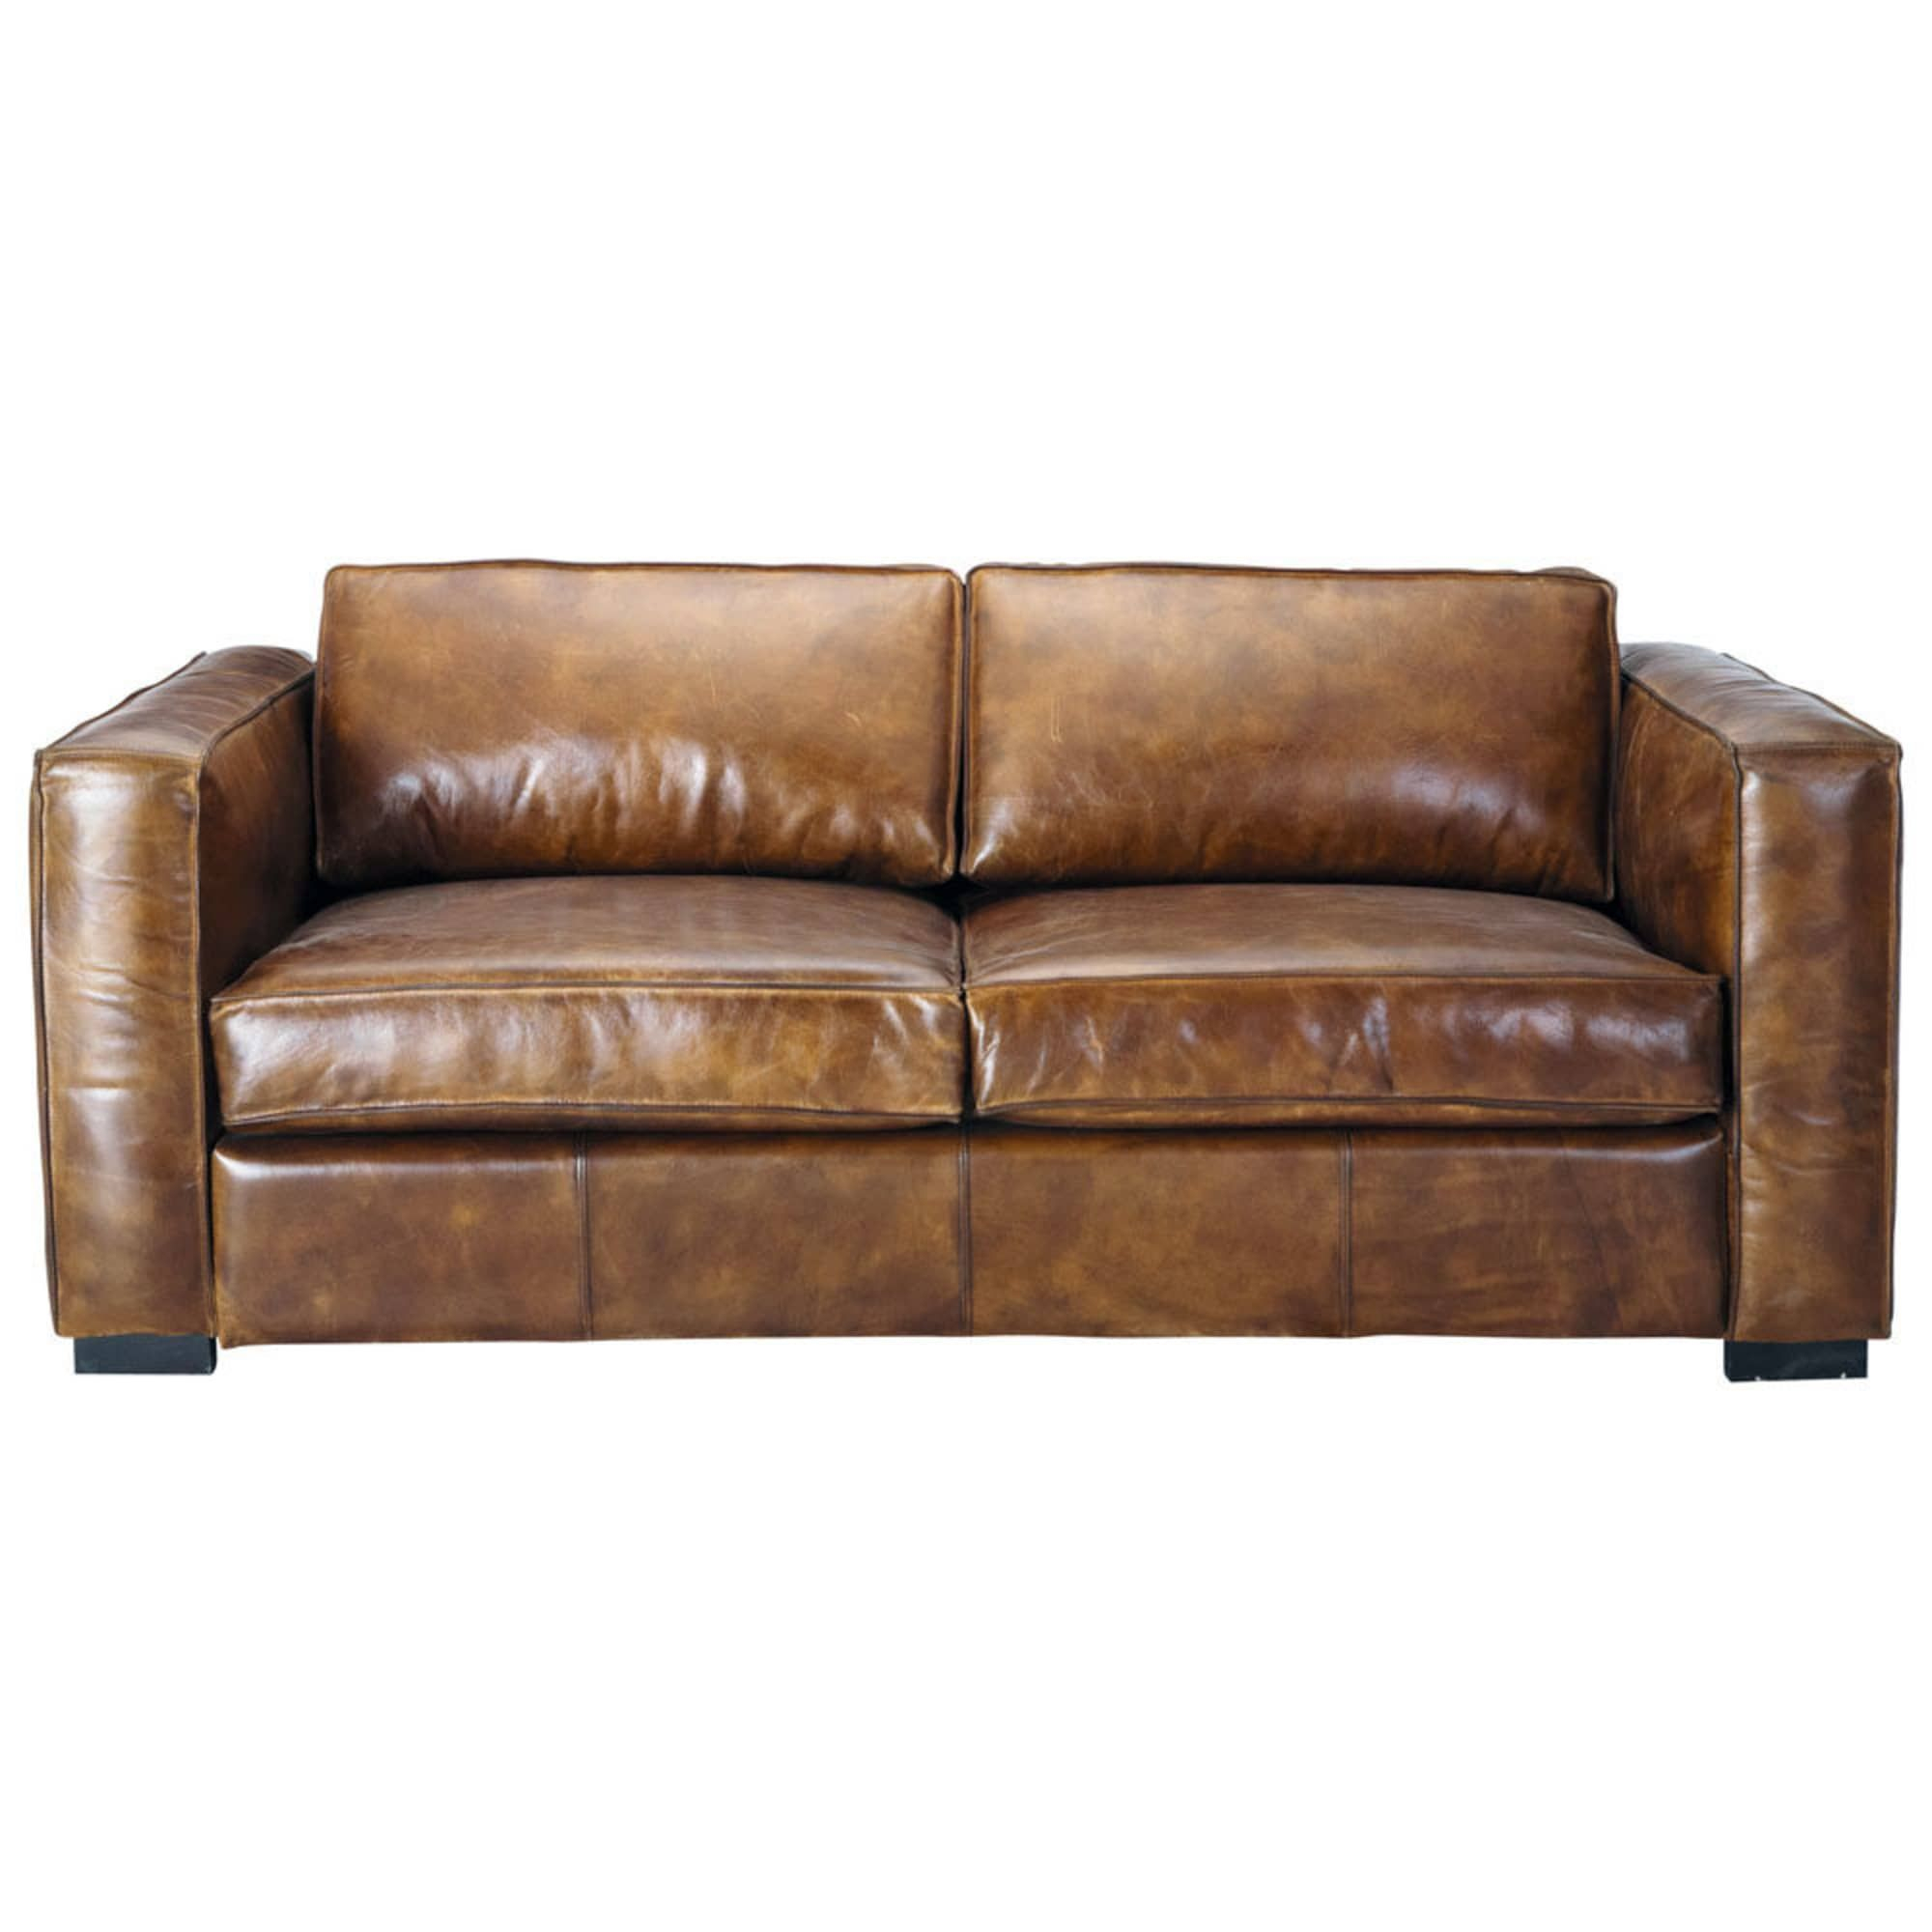 3 Seater Distressed Leather Sofa Bed In Brown Berlin ... avec Canape Convertible Marron Vieilli